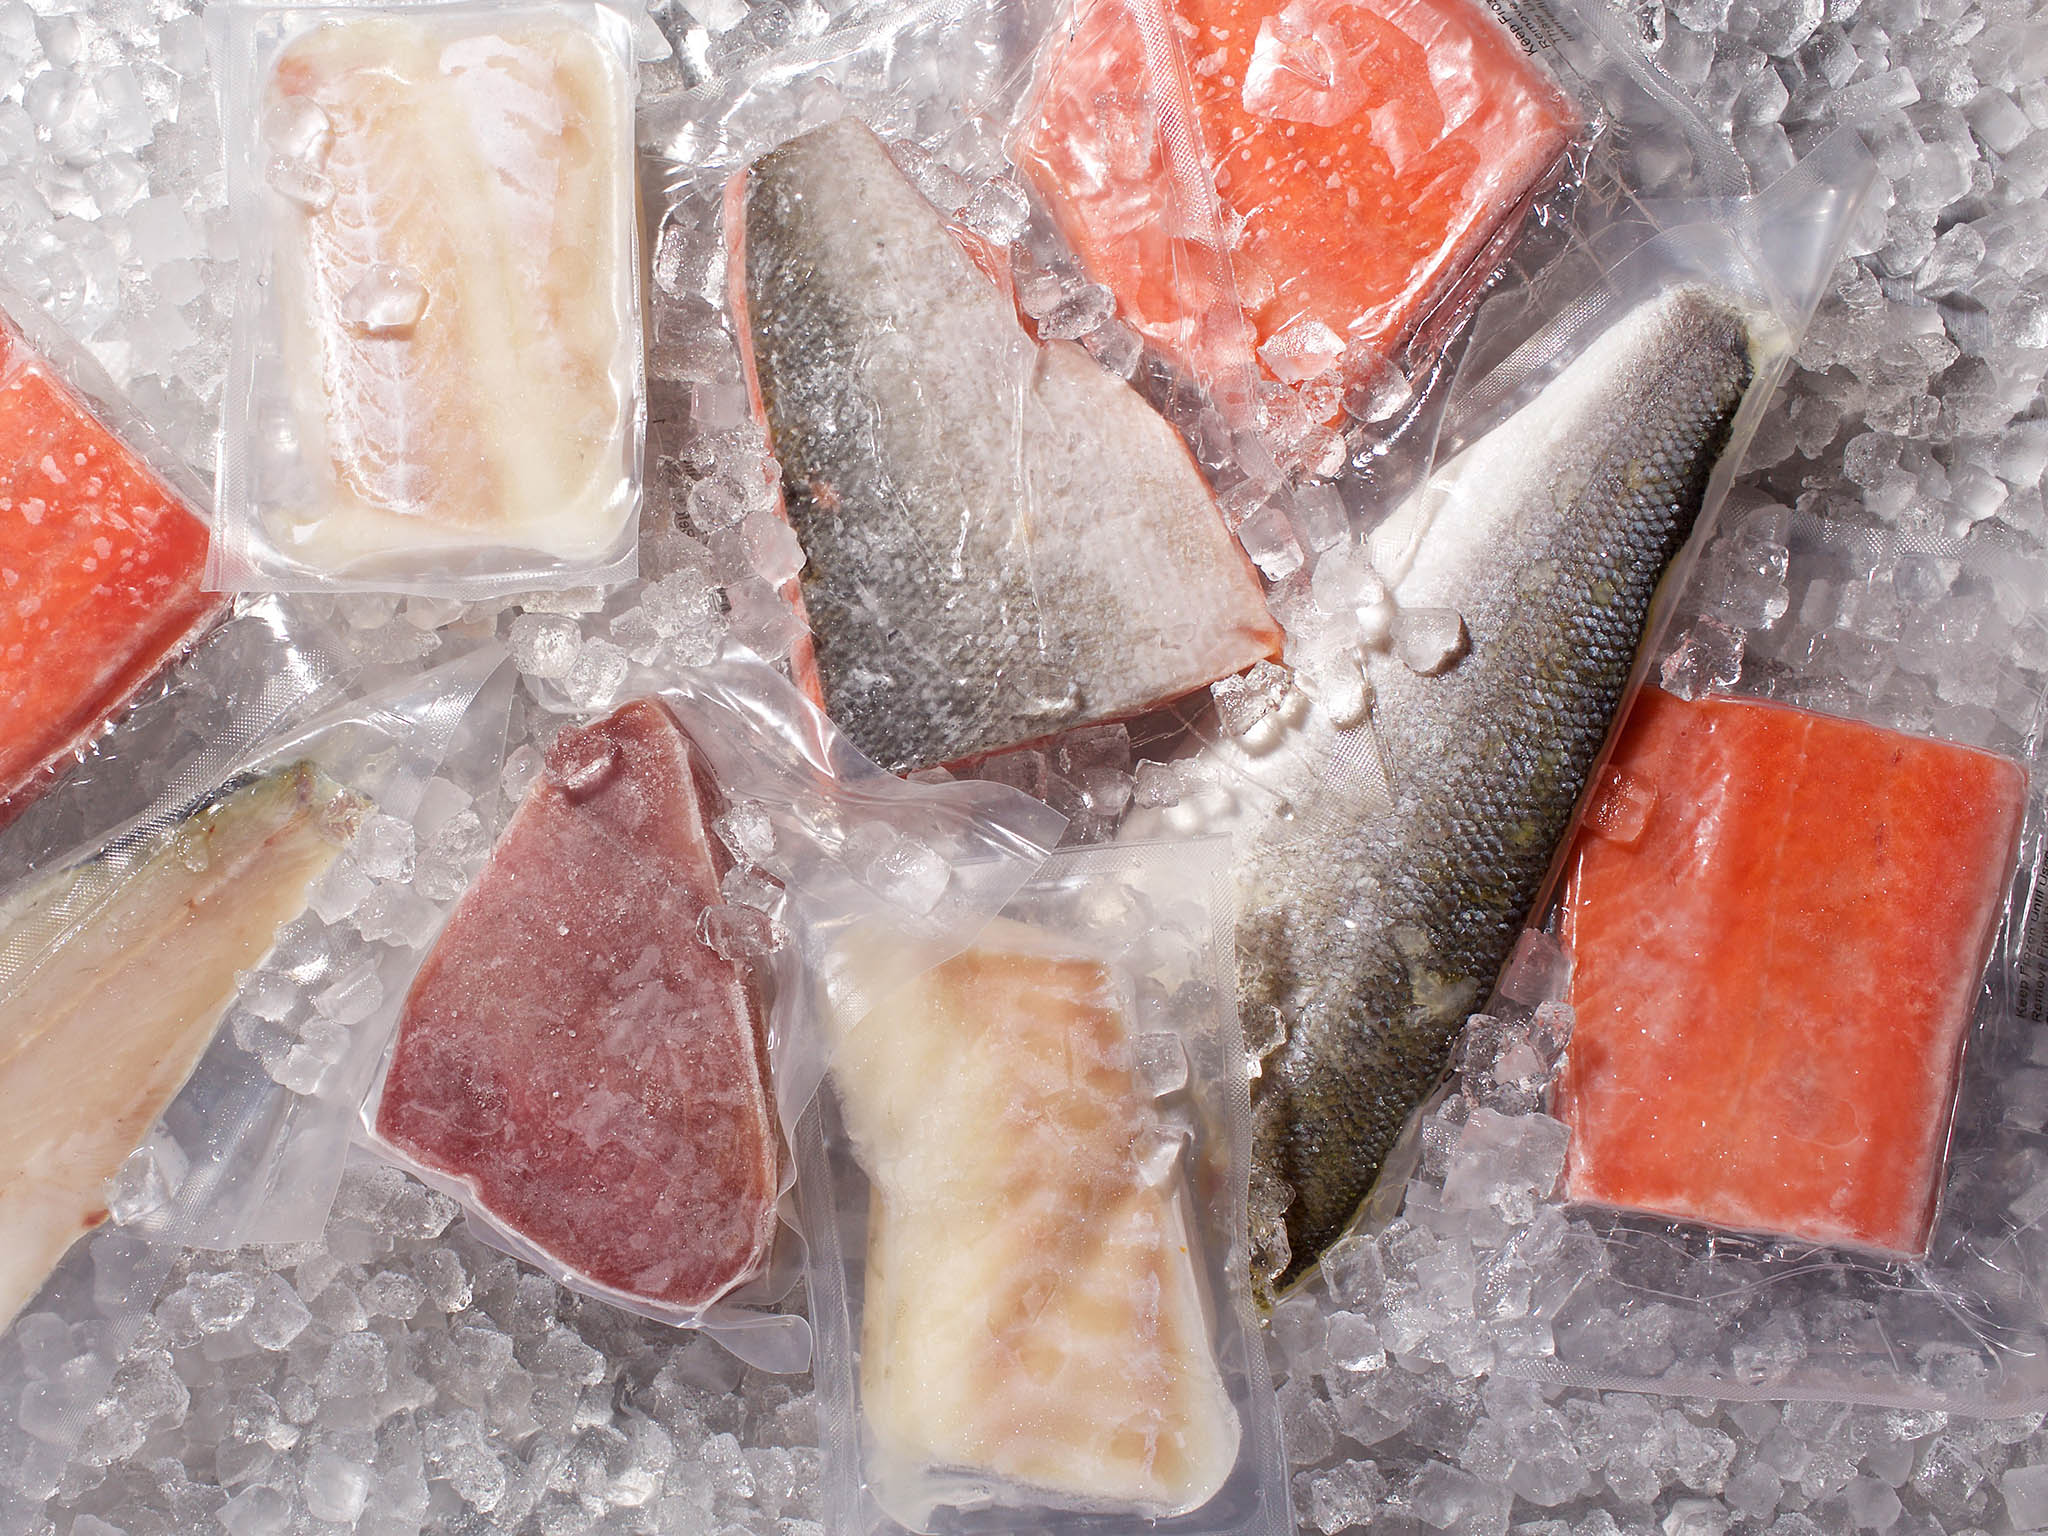 Frozen fish is a win for customers and the environment